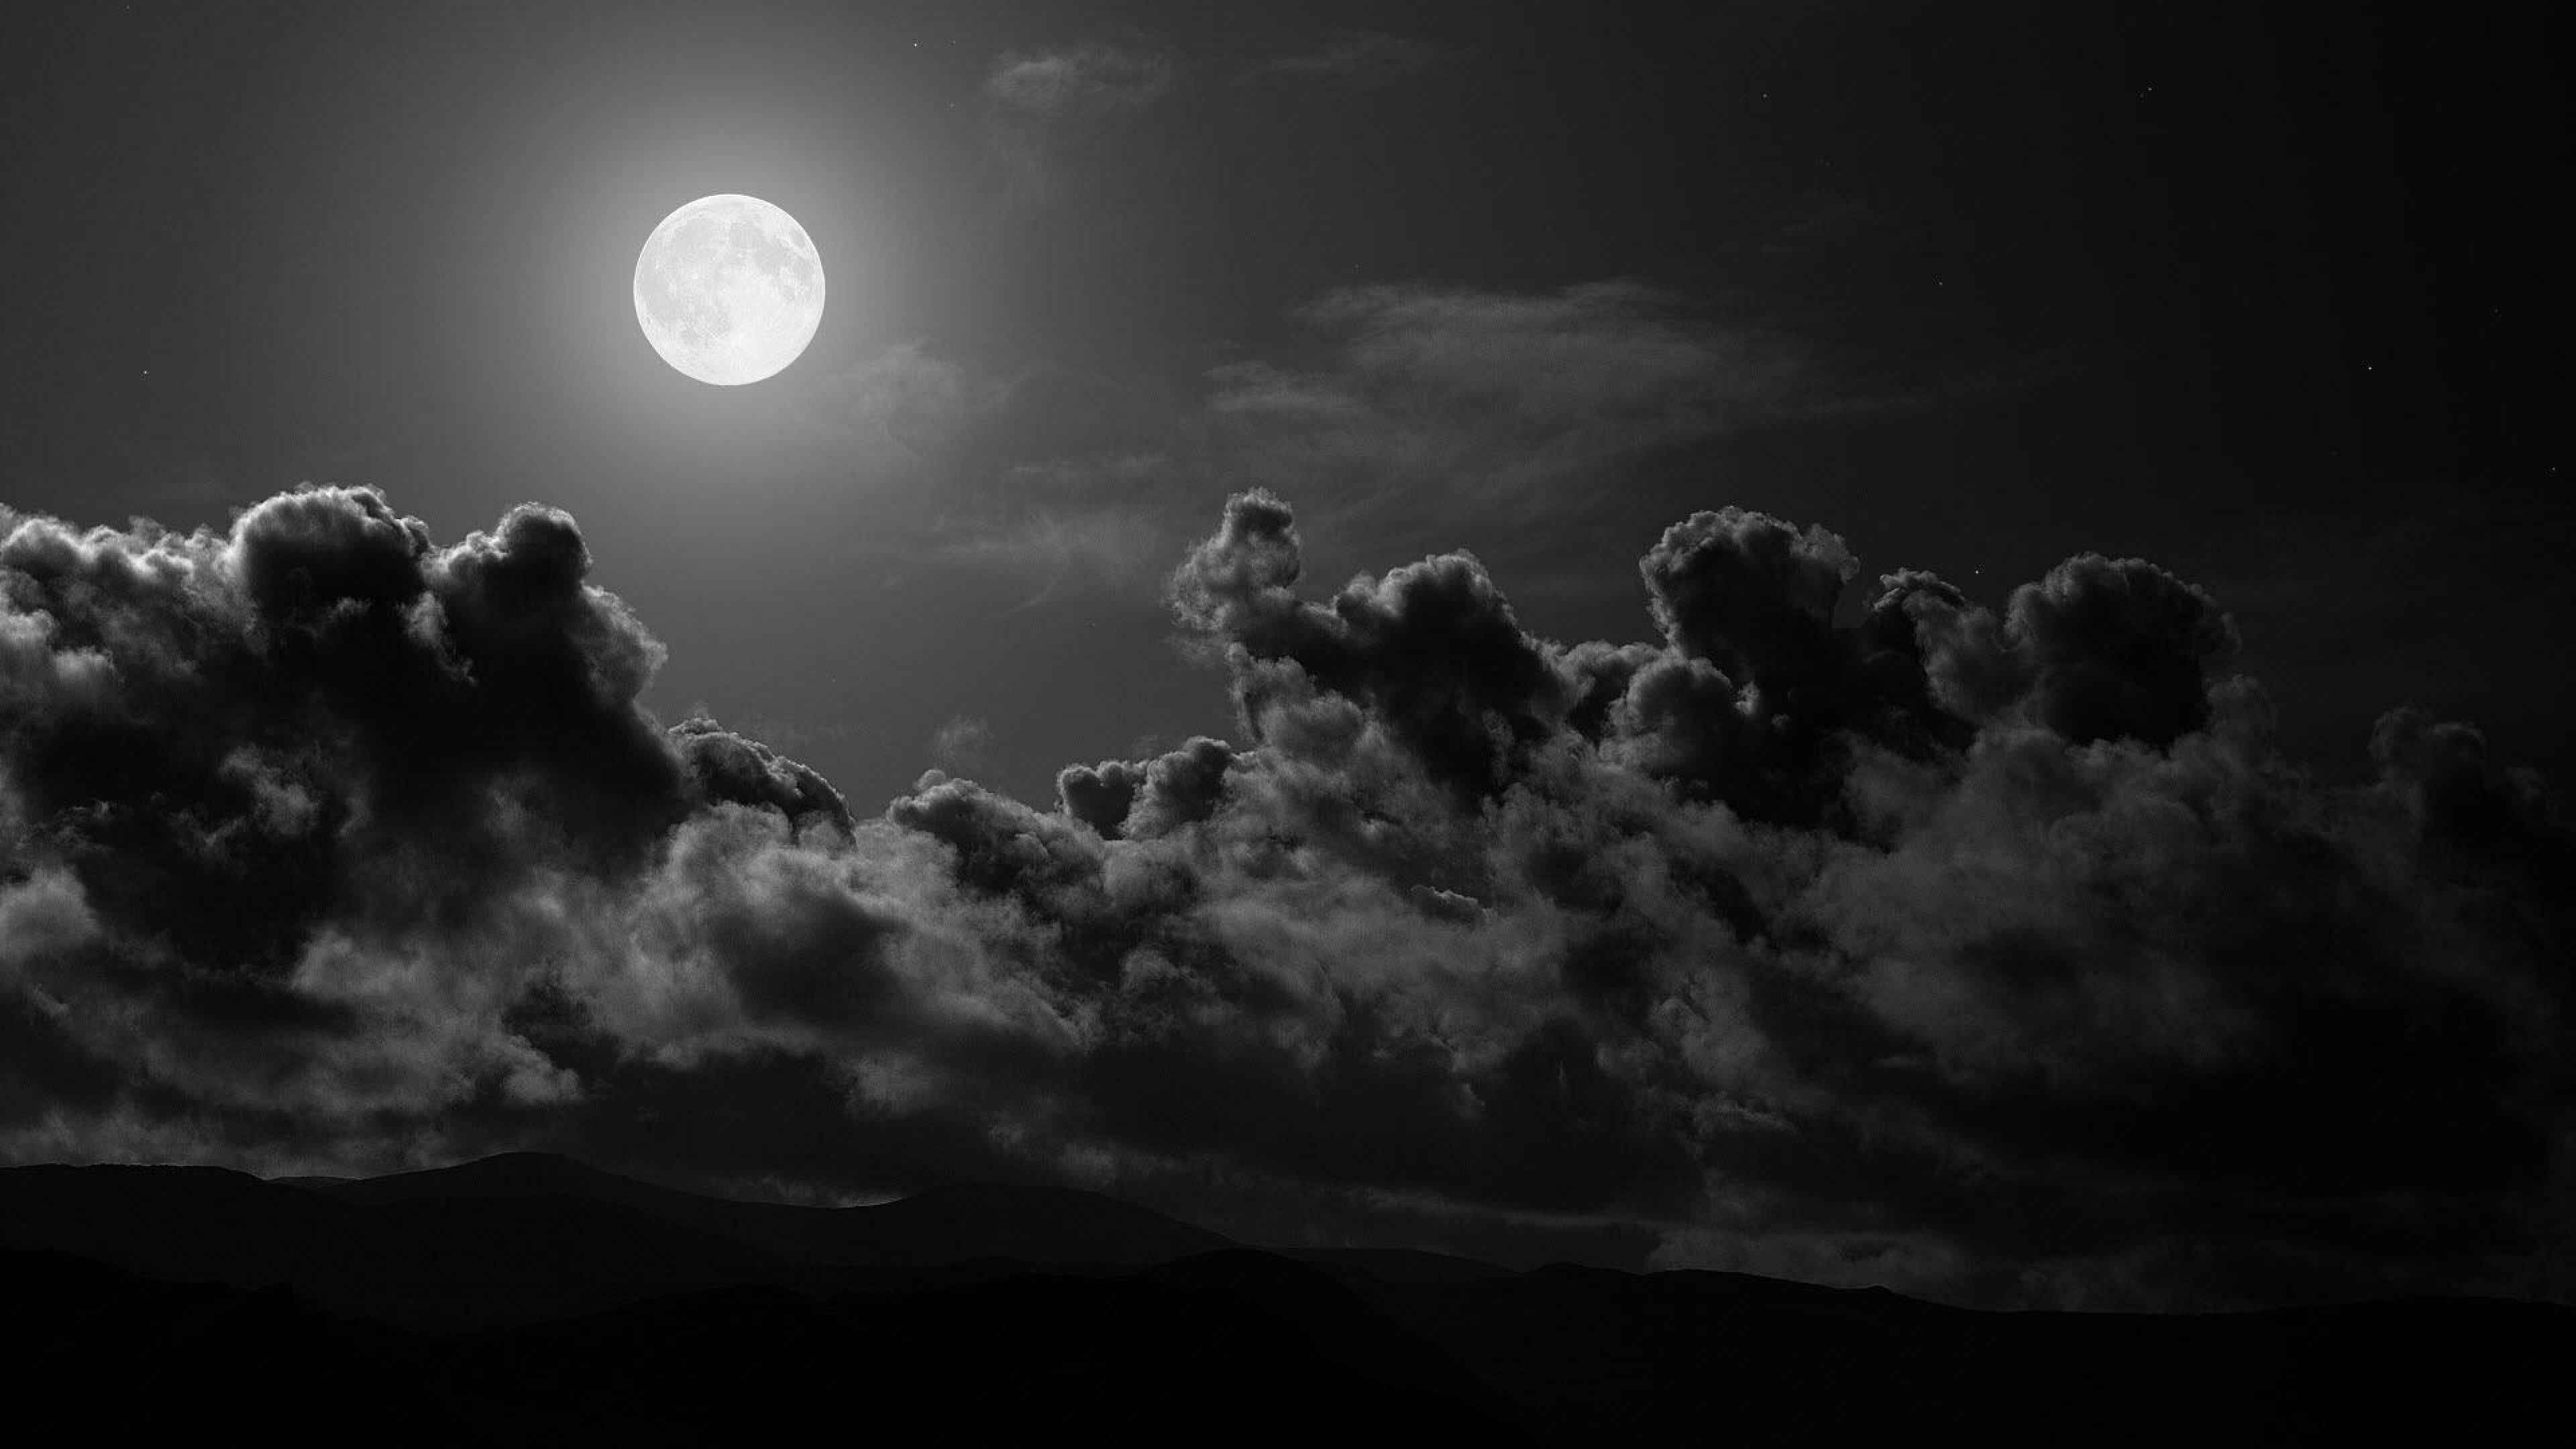 Gray Cloudy Sky: The moon, Cloudy weather, Black and white. 3840x2160 4K Background.